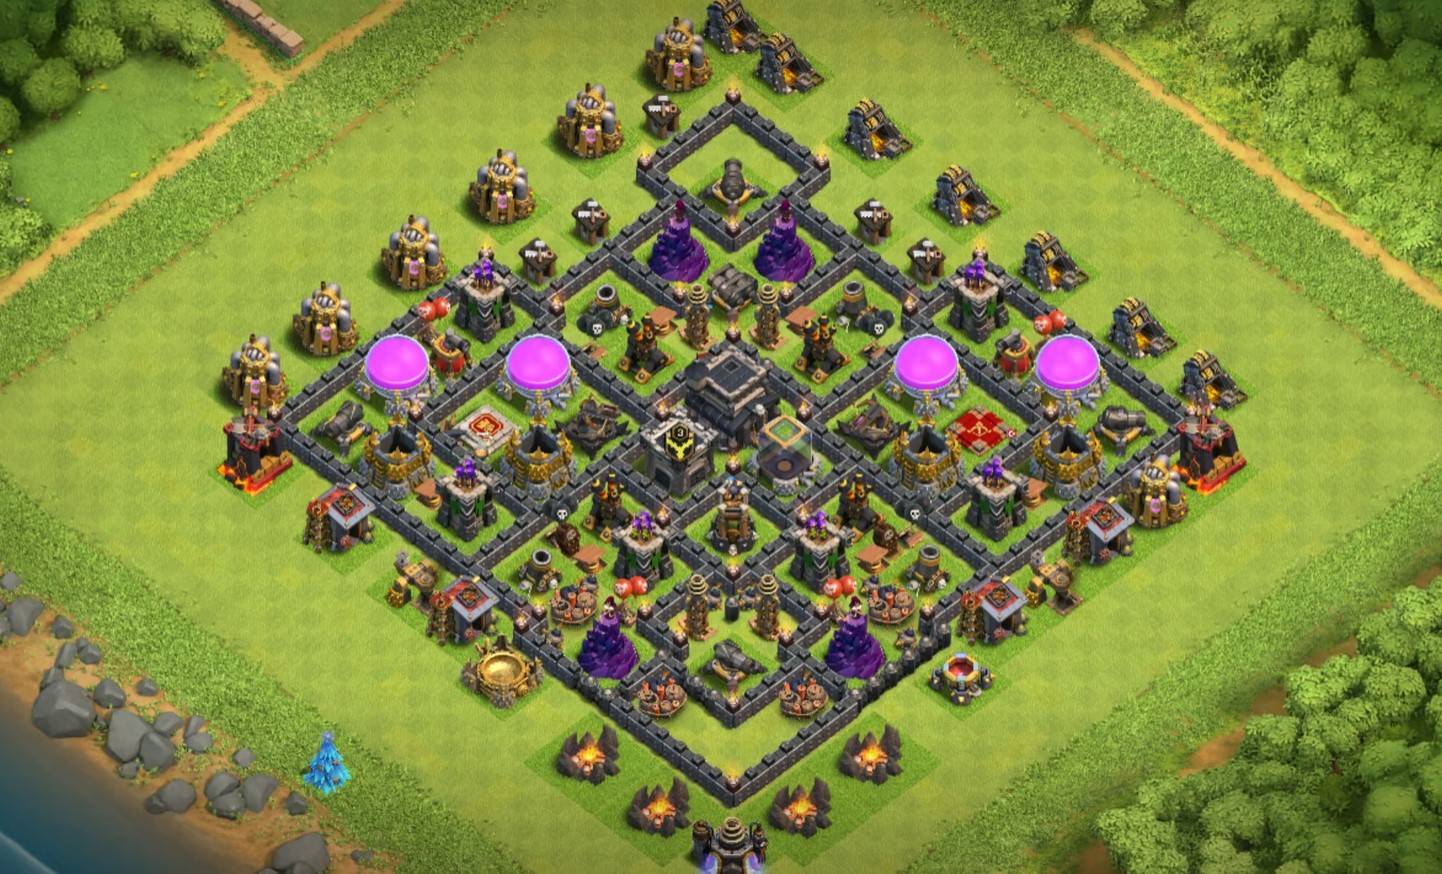 coc farming town hall 9 base with copy link